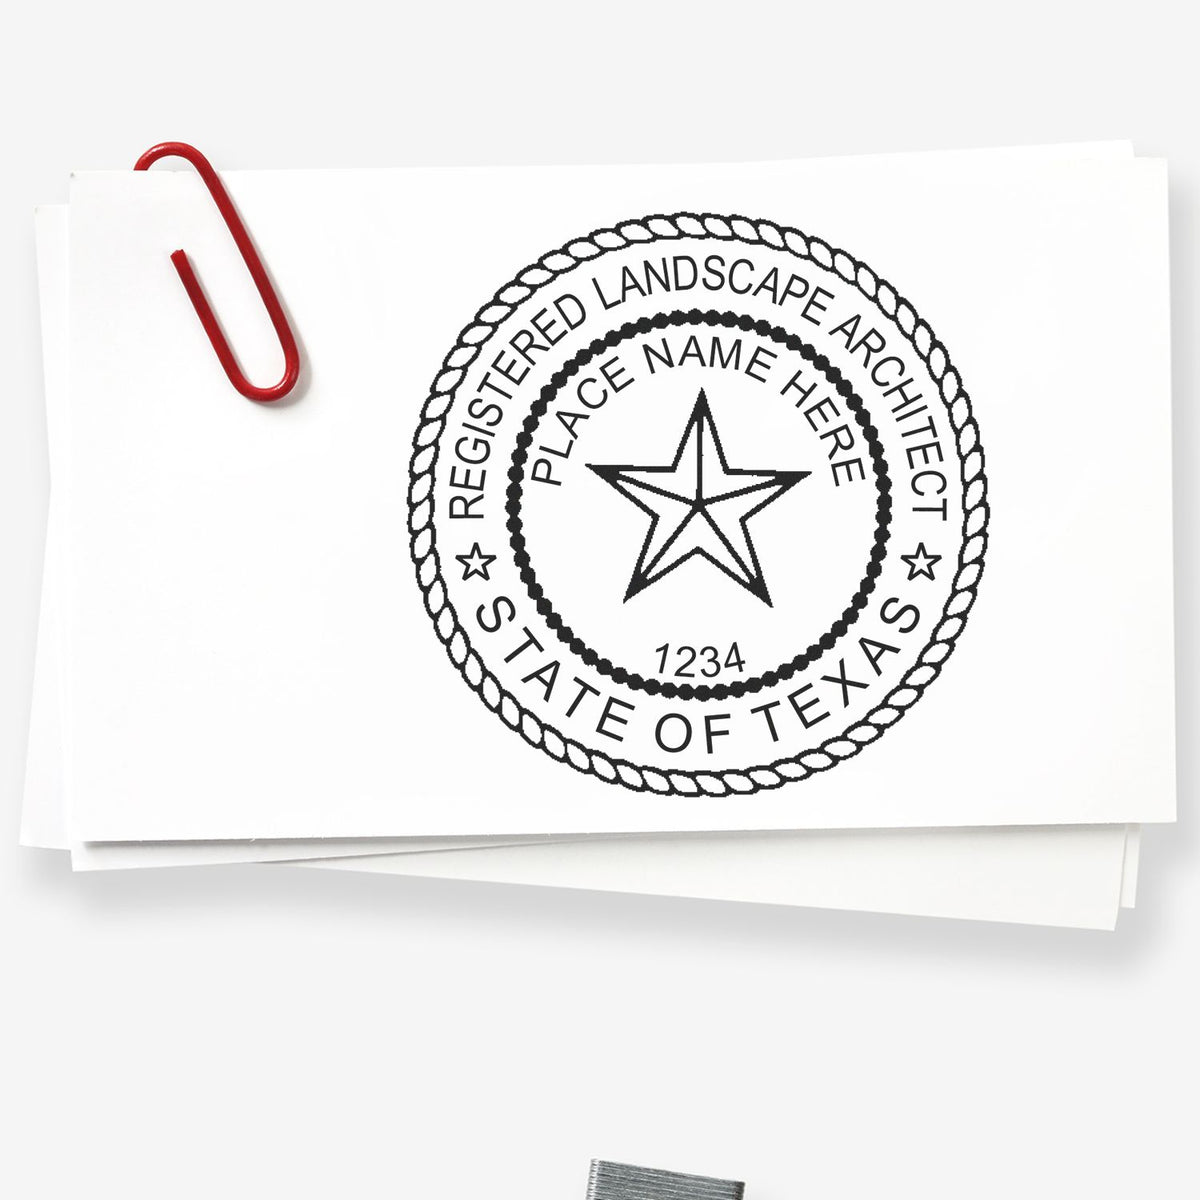 This paper is stamped with a sample imprint of the Slim Pre-Inked Texas Landscape Architect Seal Stamp, signifying its quality and reliability.